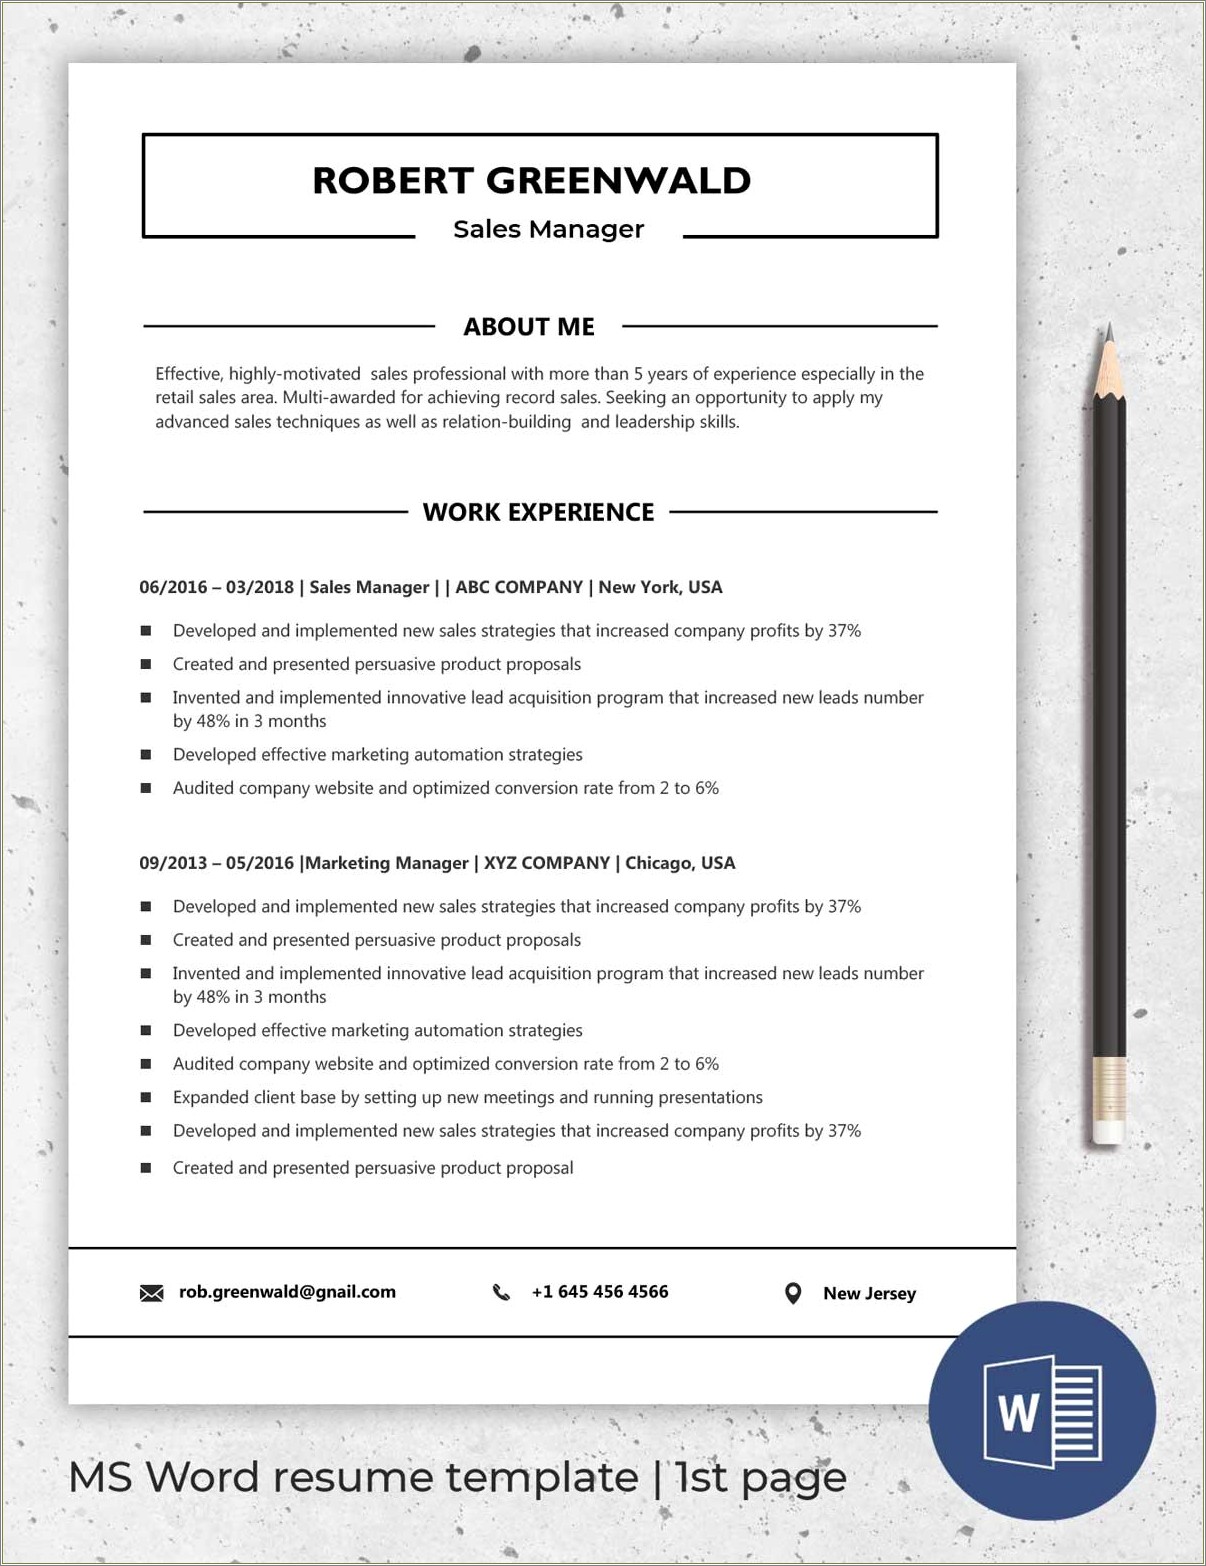 Free Ms Word Resume Template 2016